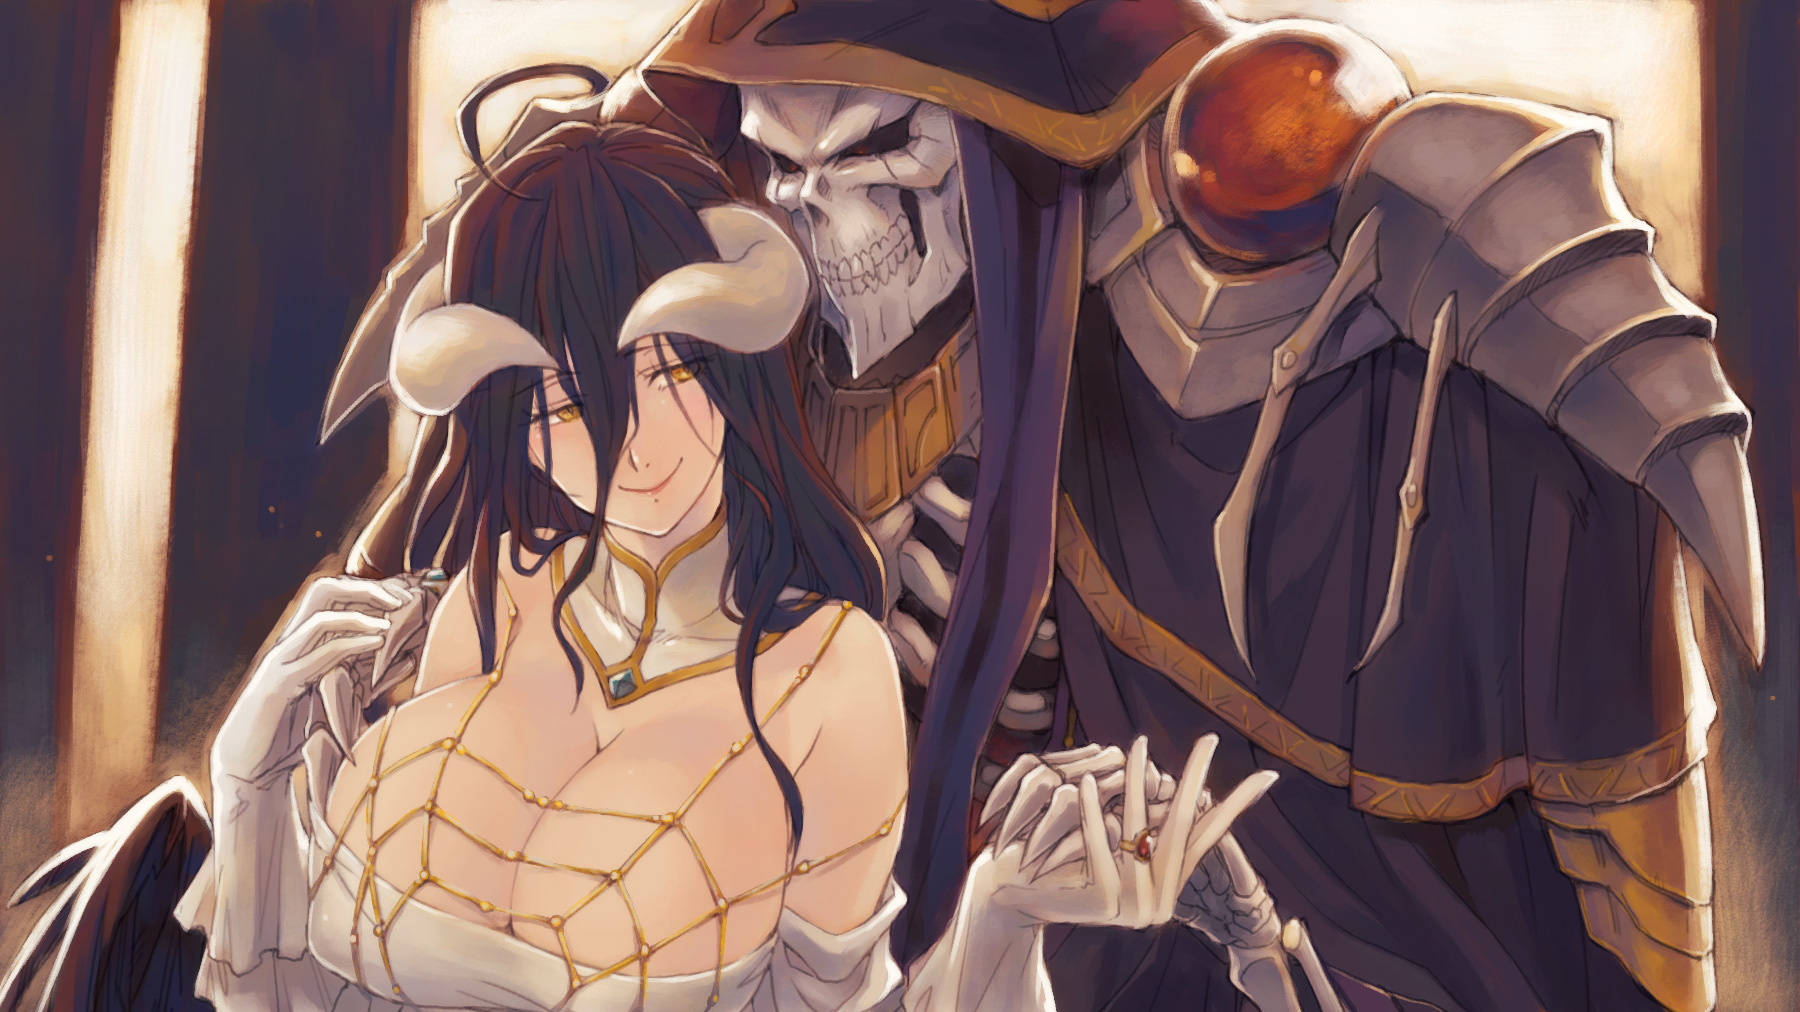 Anime 1800x1012 Overlord (anime) anime girls 2D fan art digital art huge breasts long hair white gloves no bra succubus horns smiling black hair white dress yellow eyes cleavage skeleton Ainz Ooal Gown Albedo (OverLord)